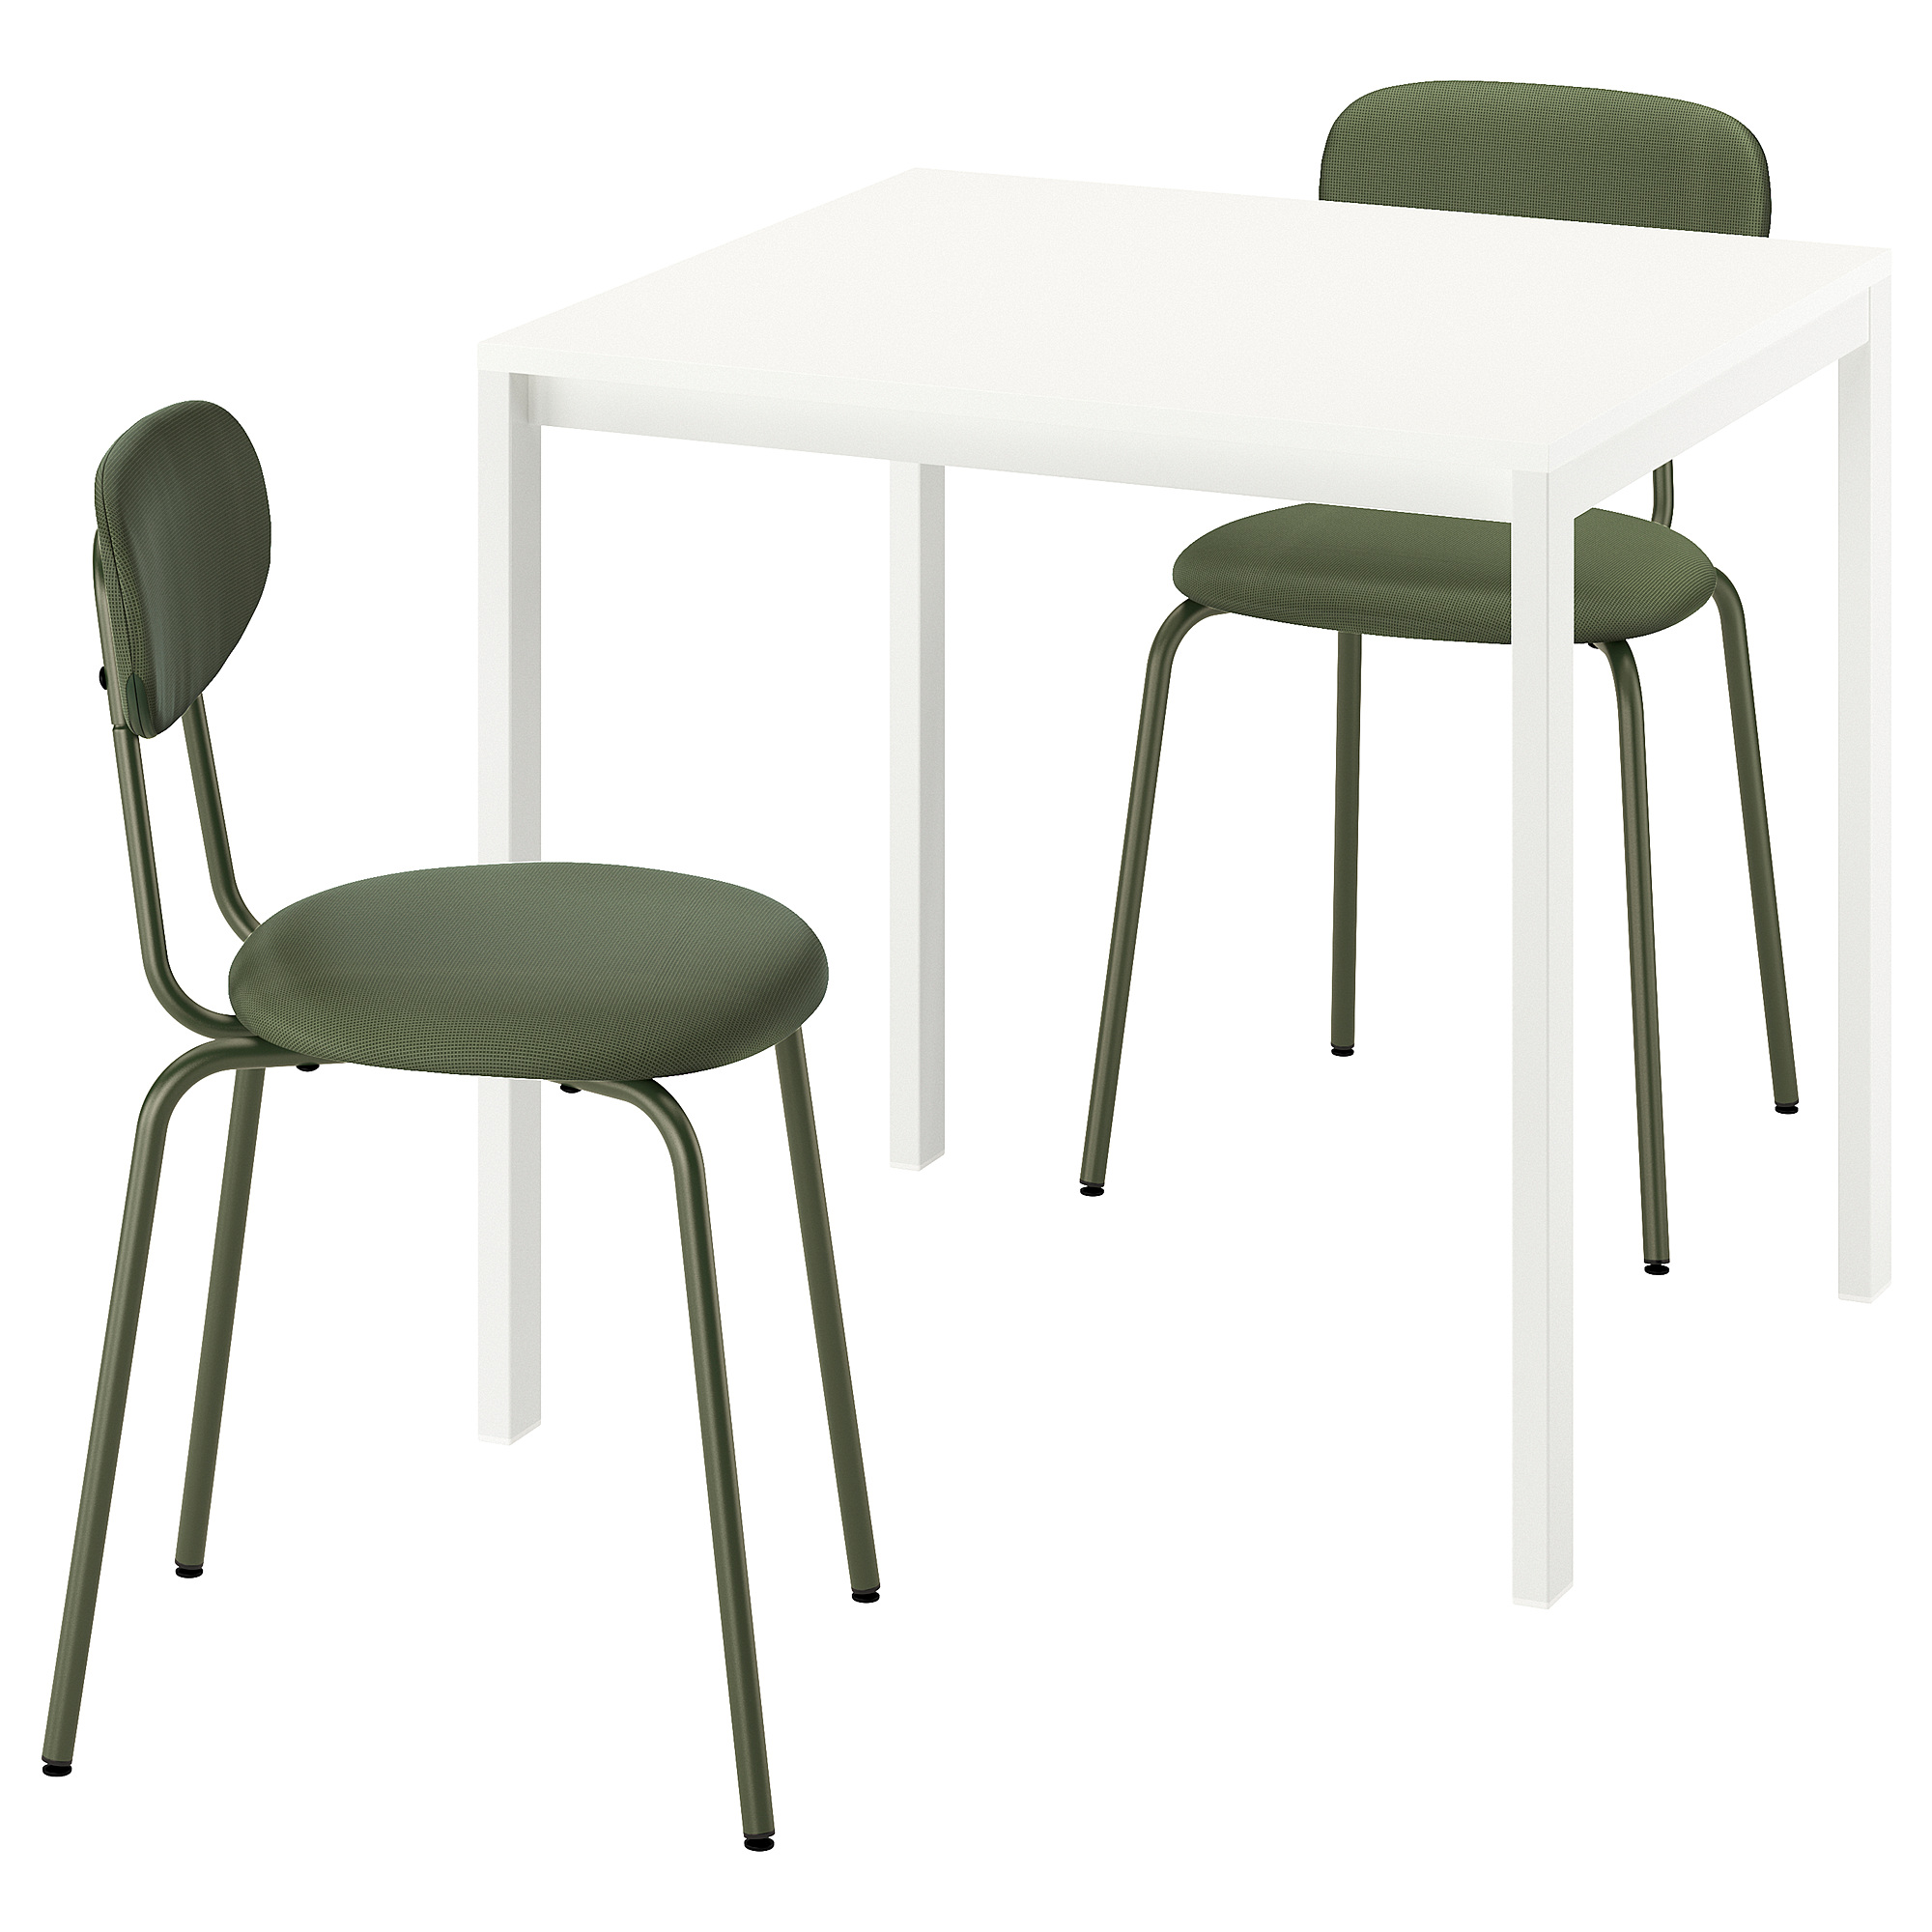 MELLTORP/ÖSTANÖ table and 2 chairs